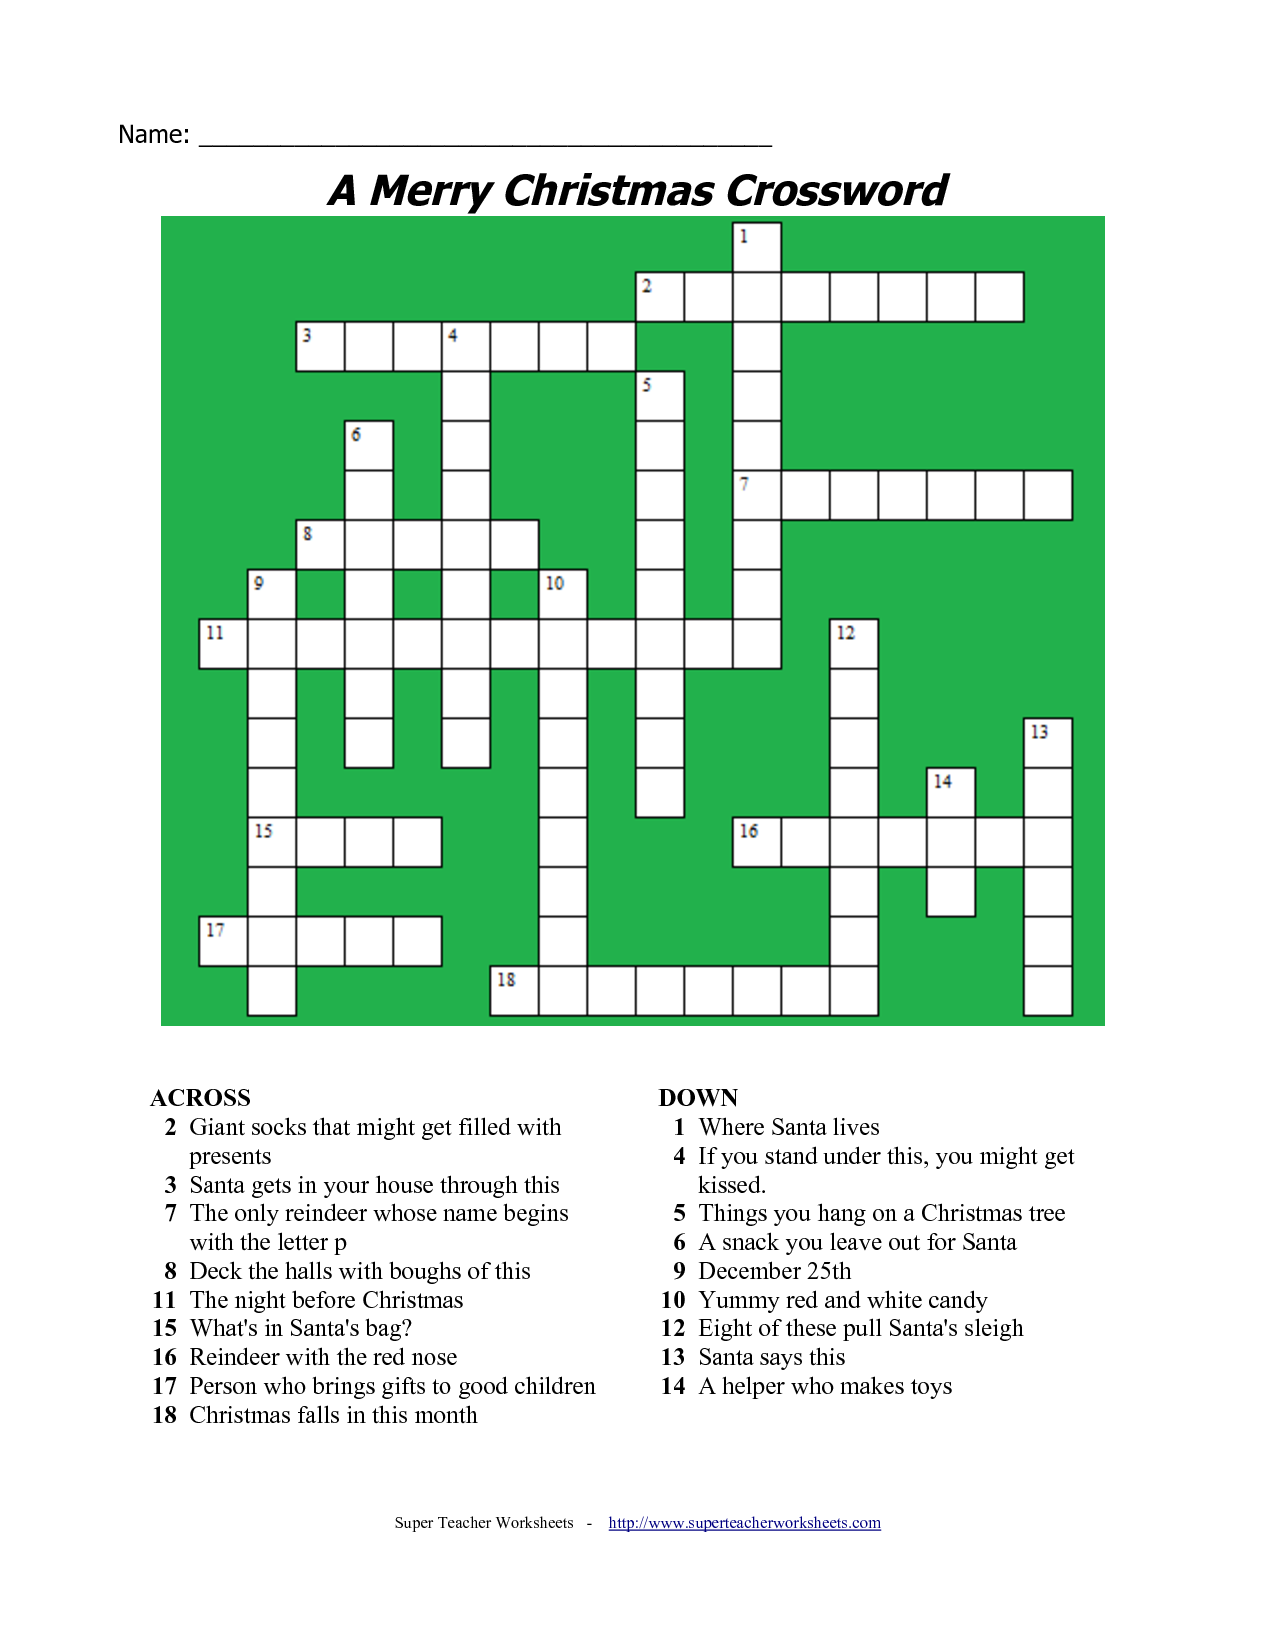 17 Fun Printable Christmas Crossword Puzzles | Kittybabylove